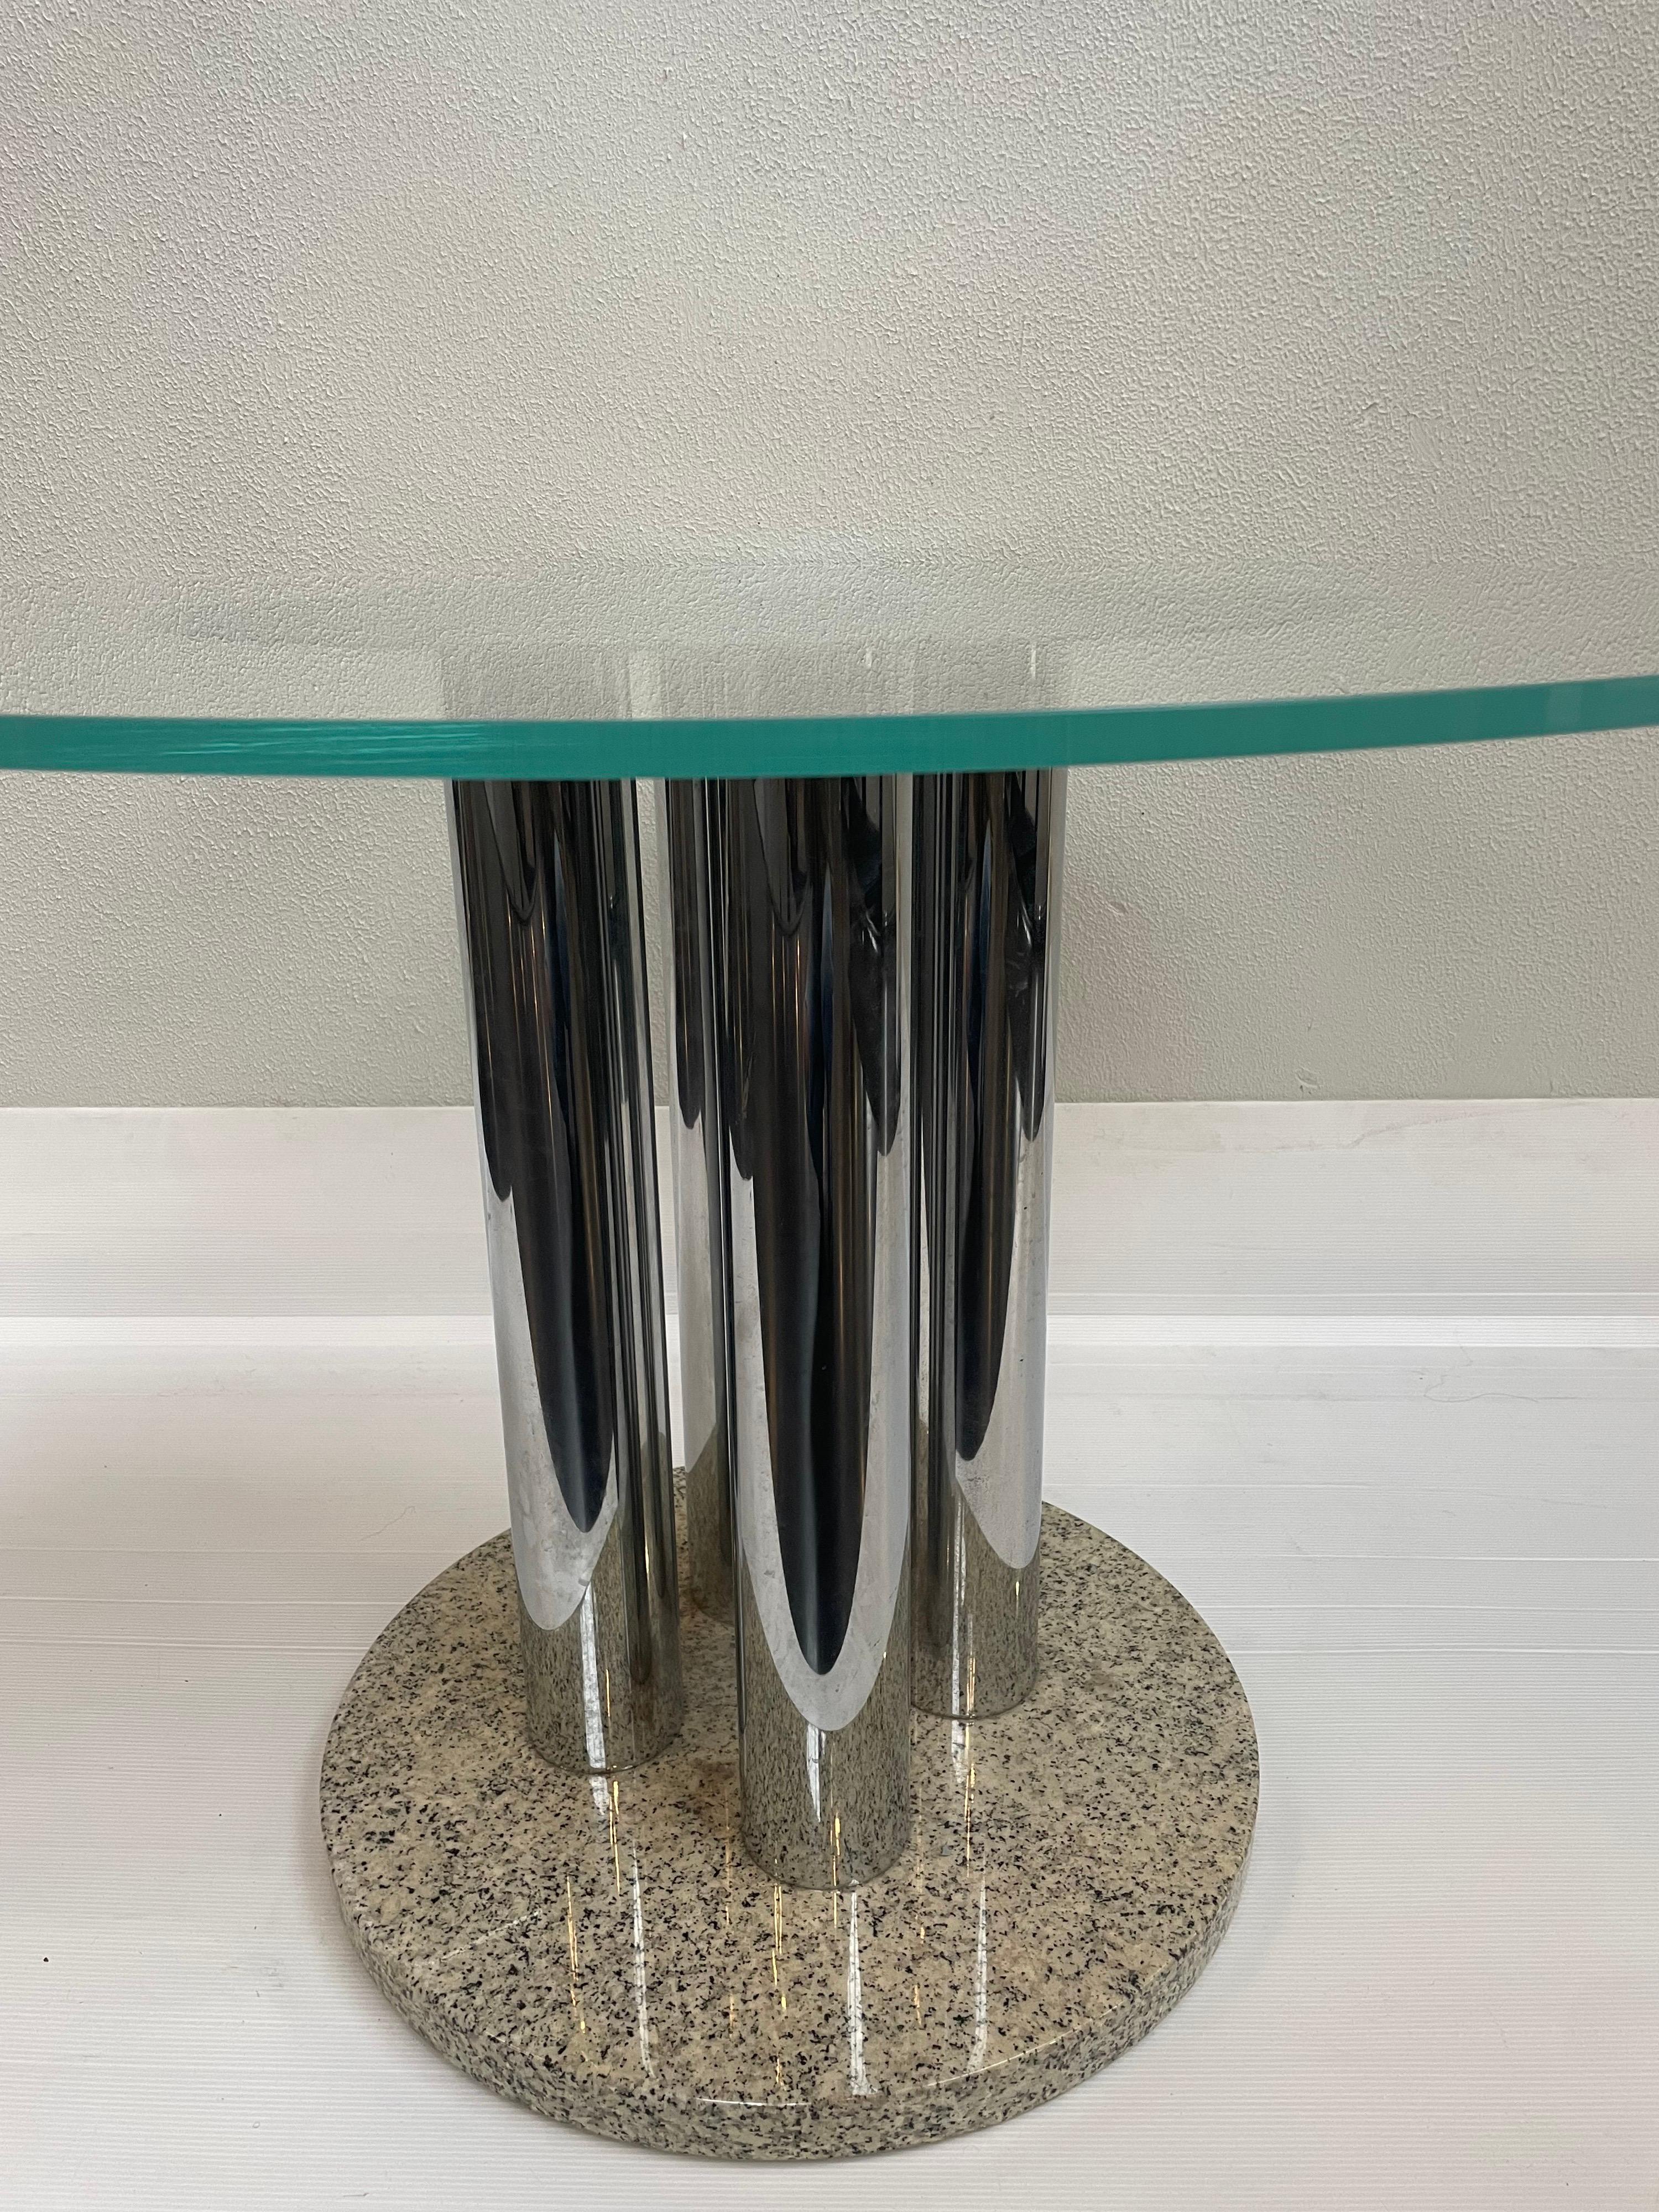 1970s Italian round dining table by Zanotta. A polished granite circular base with four chrome columns and a thick round glass top.